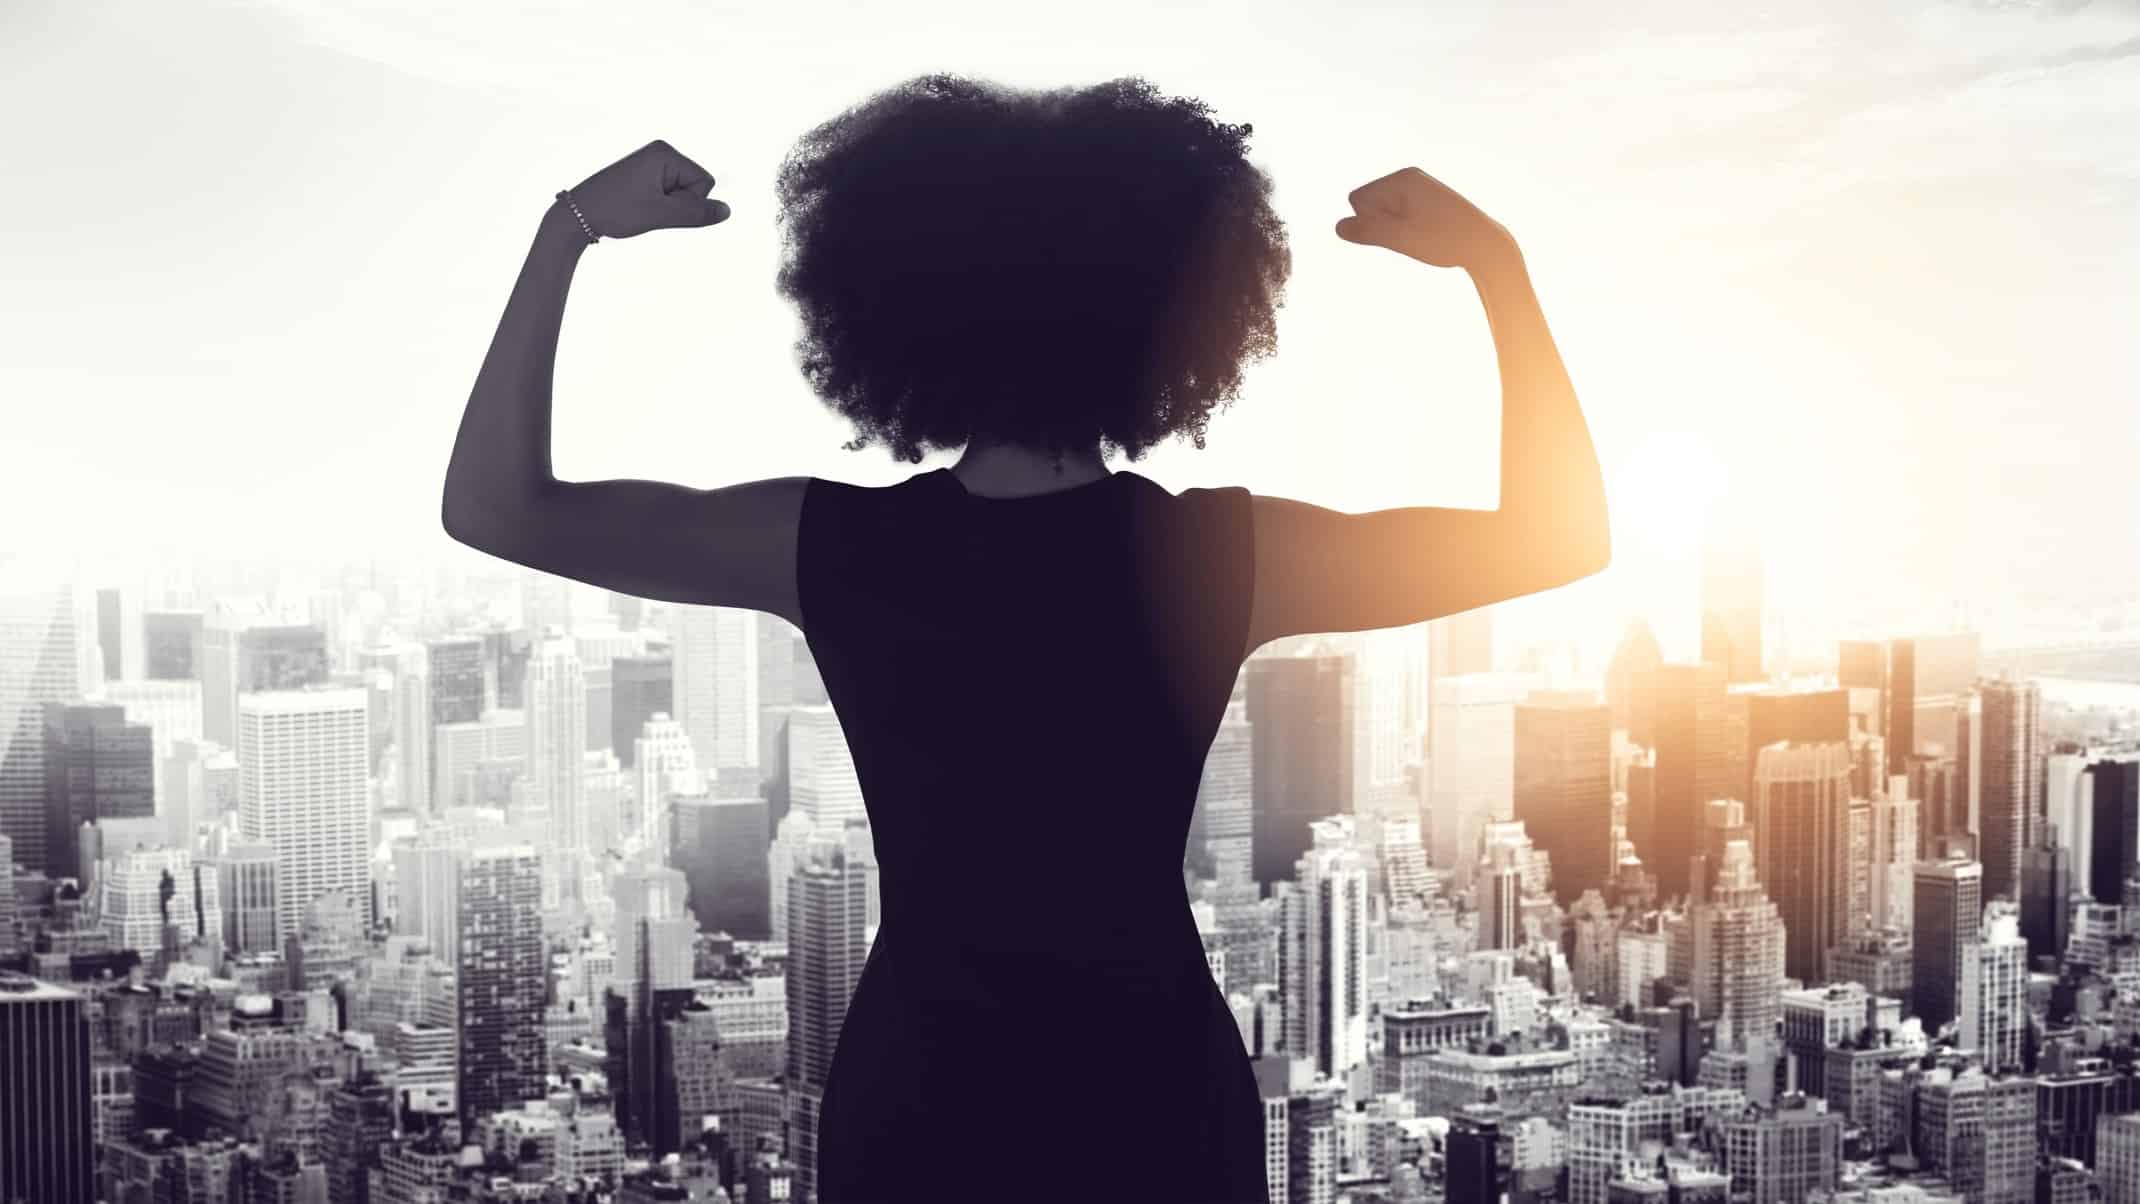 A business woman flexes her muscles overlooking a city scape below